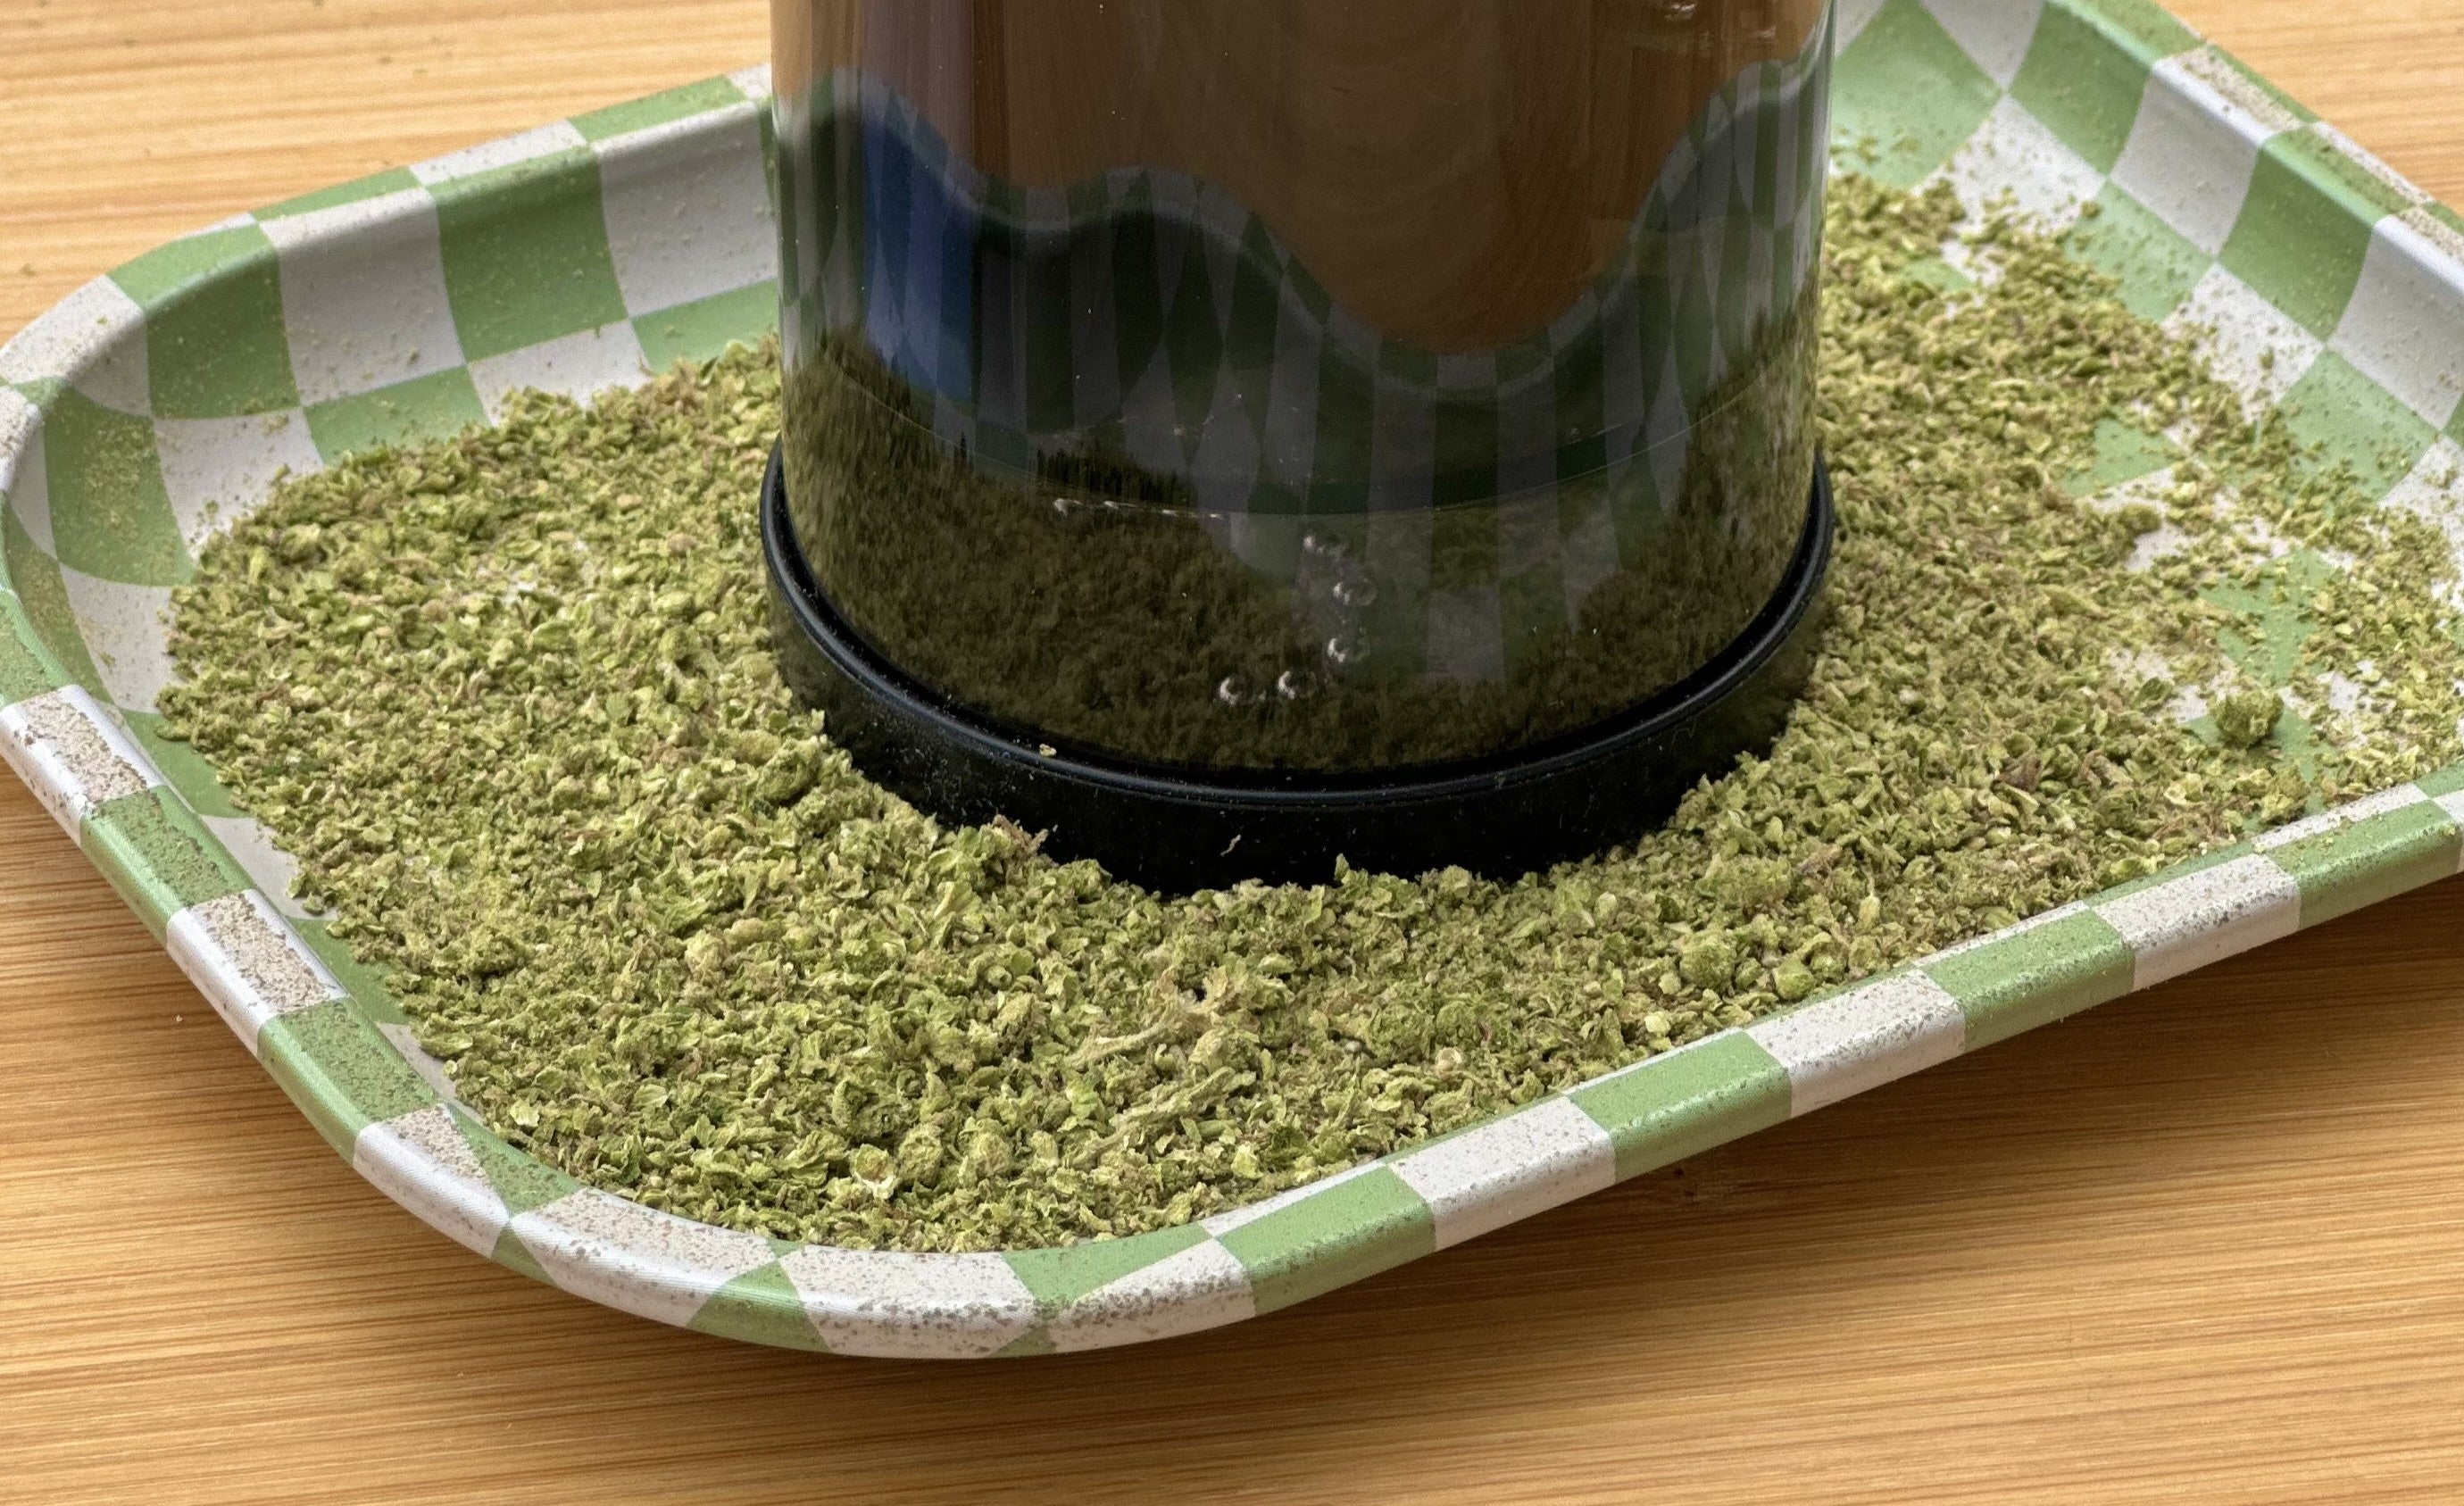 The Best Way to Grind Your Weed